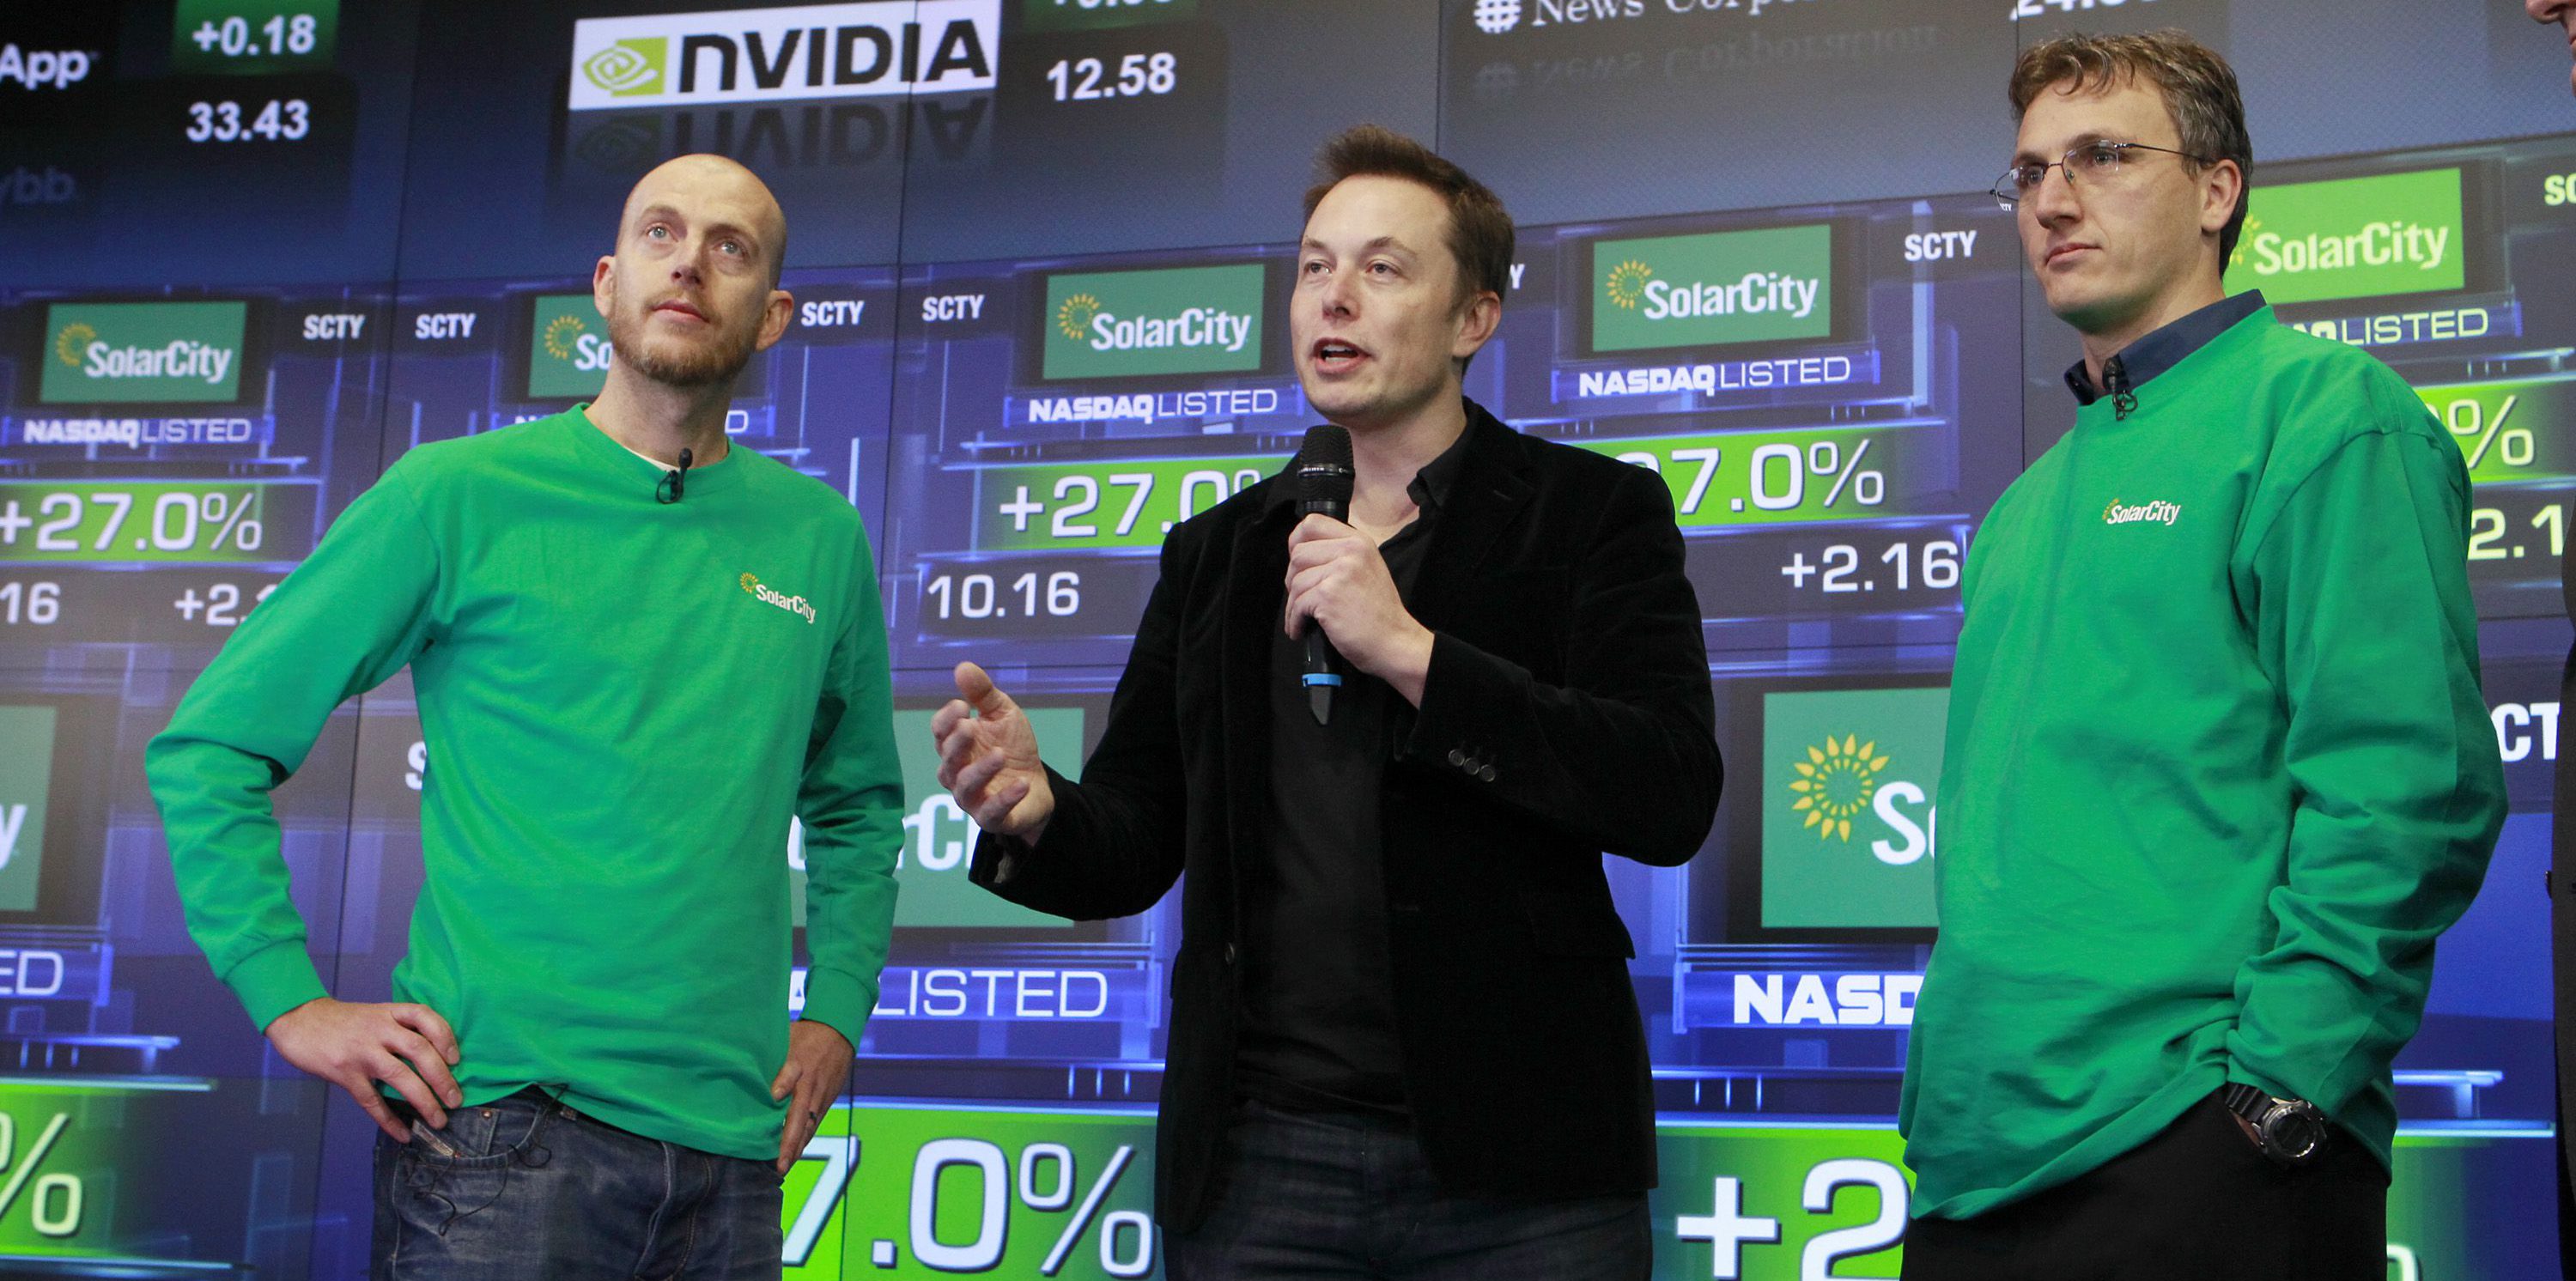 Founder & COO Peter Rive, Chairman Elon Musk , SolarCity Founder & CEO Lyndon Rive speak at the companys IPO at the NASDAQ stock exchange on December 13, 2012 in Manhattan, New York. SolarCity is a leader of distributed clean energy and will trade under SCTY. (Mark Von Holden/AP Images for SolarCity)